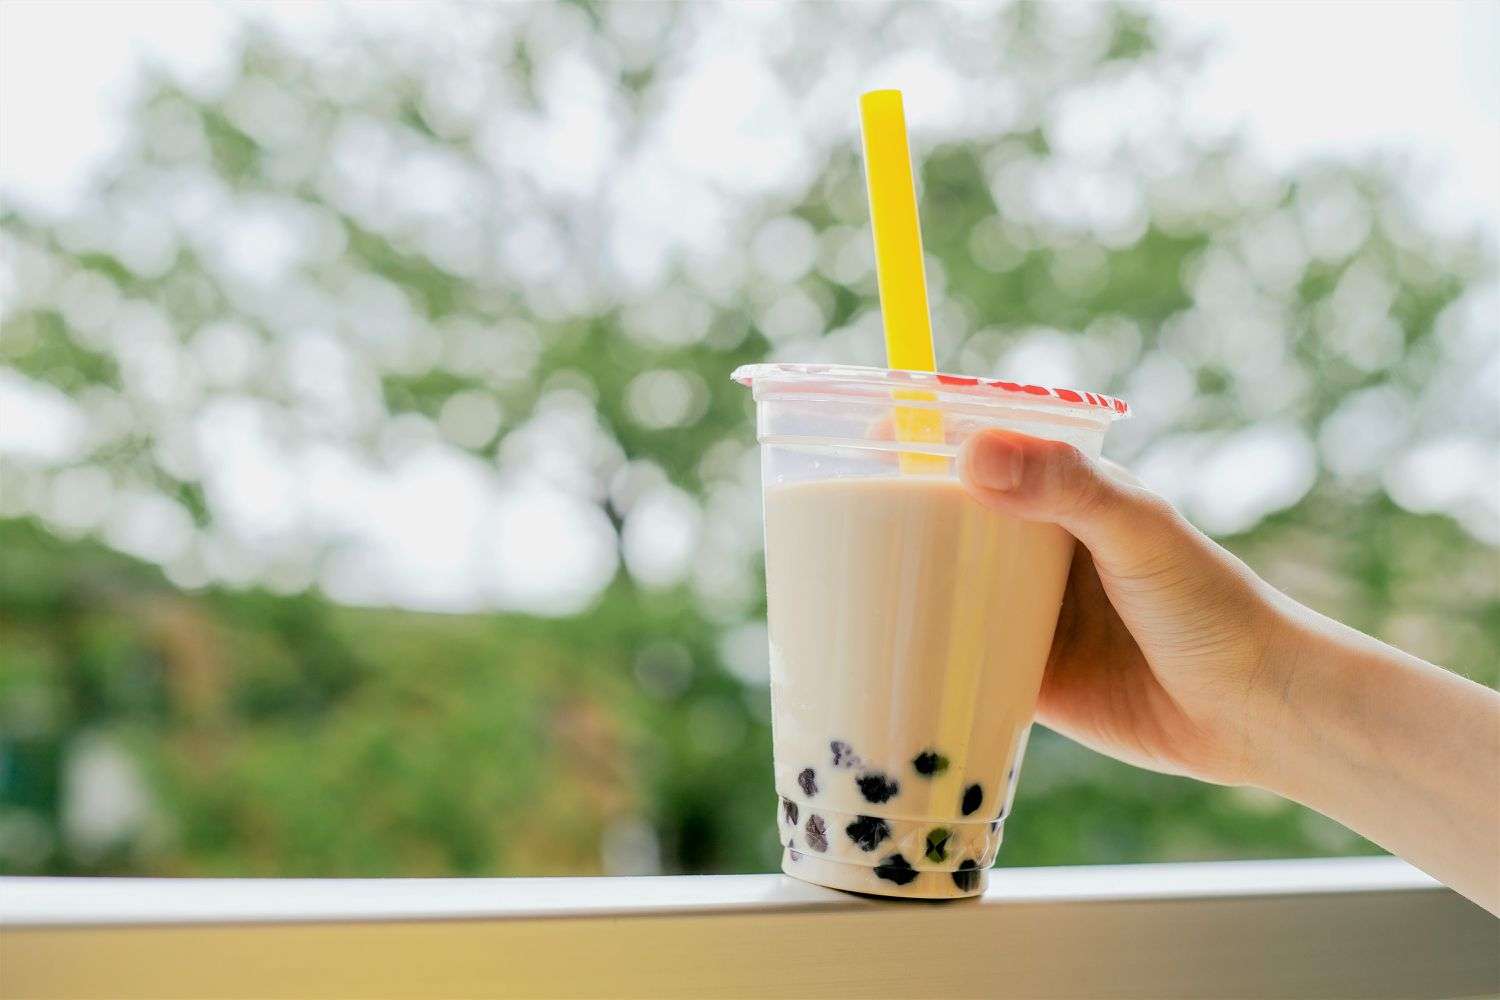 What Goes Well With Bubble Tea